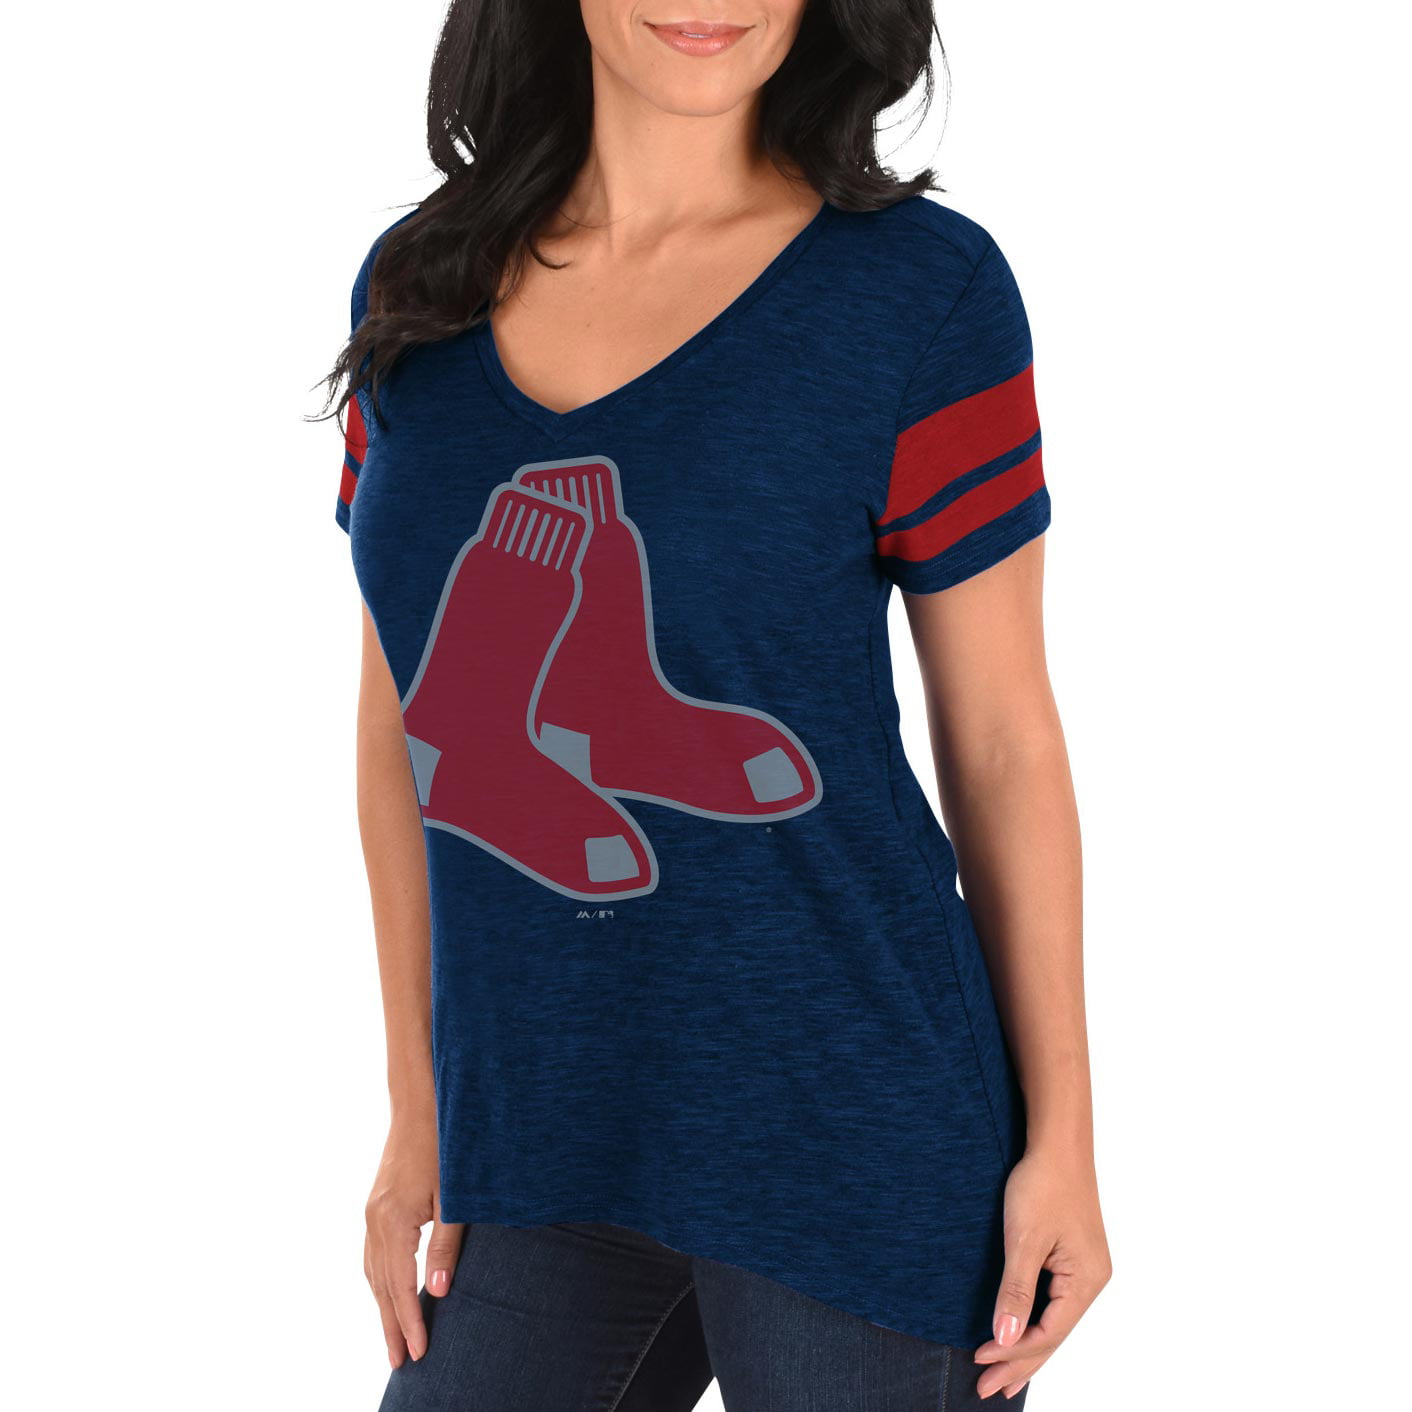 red sox womens jersey